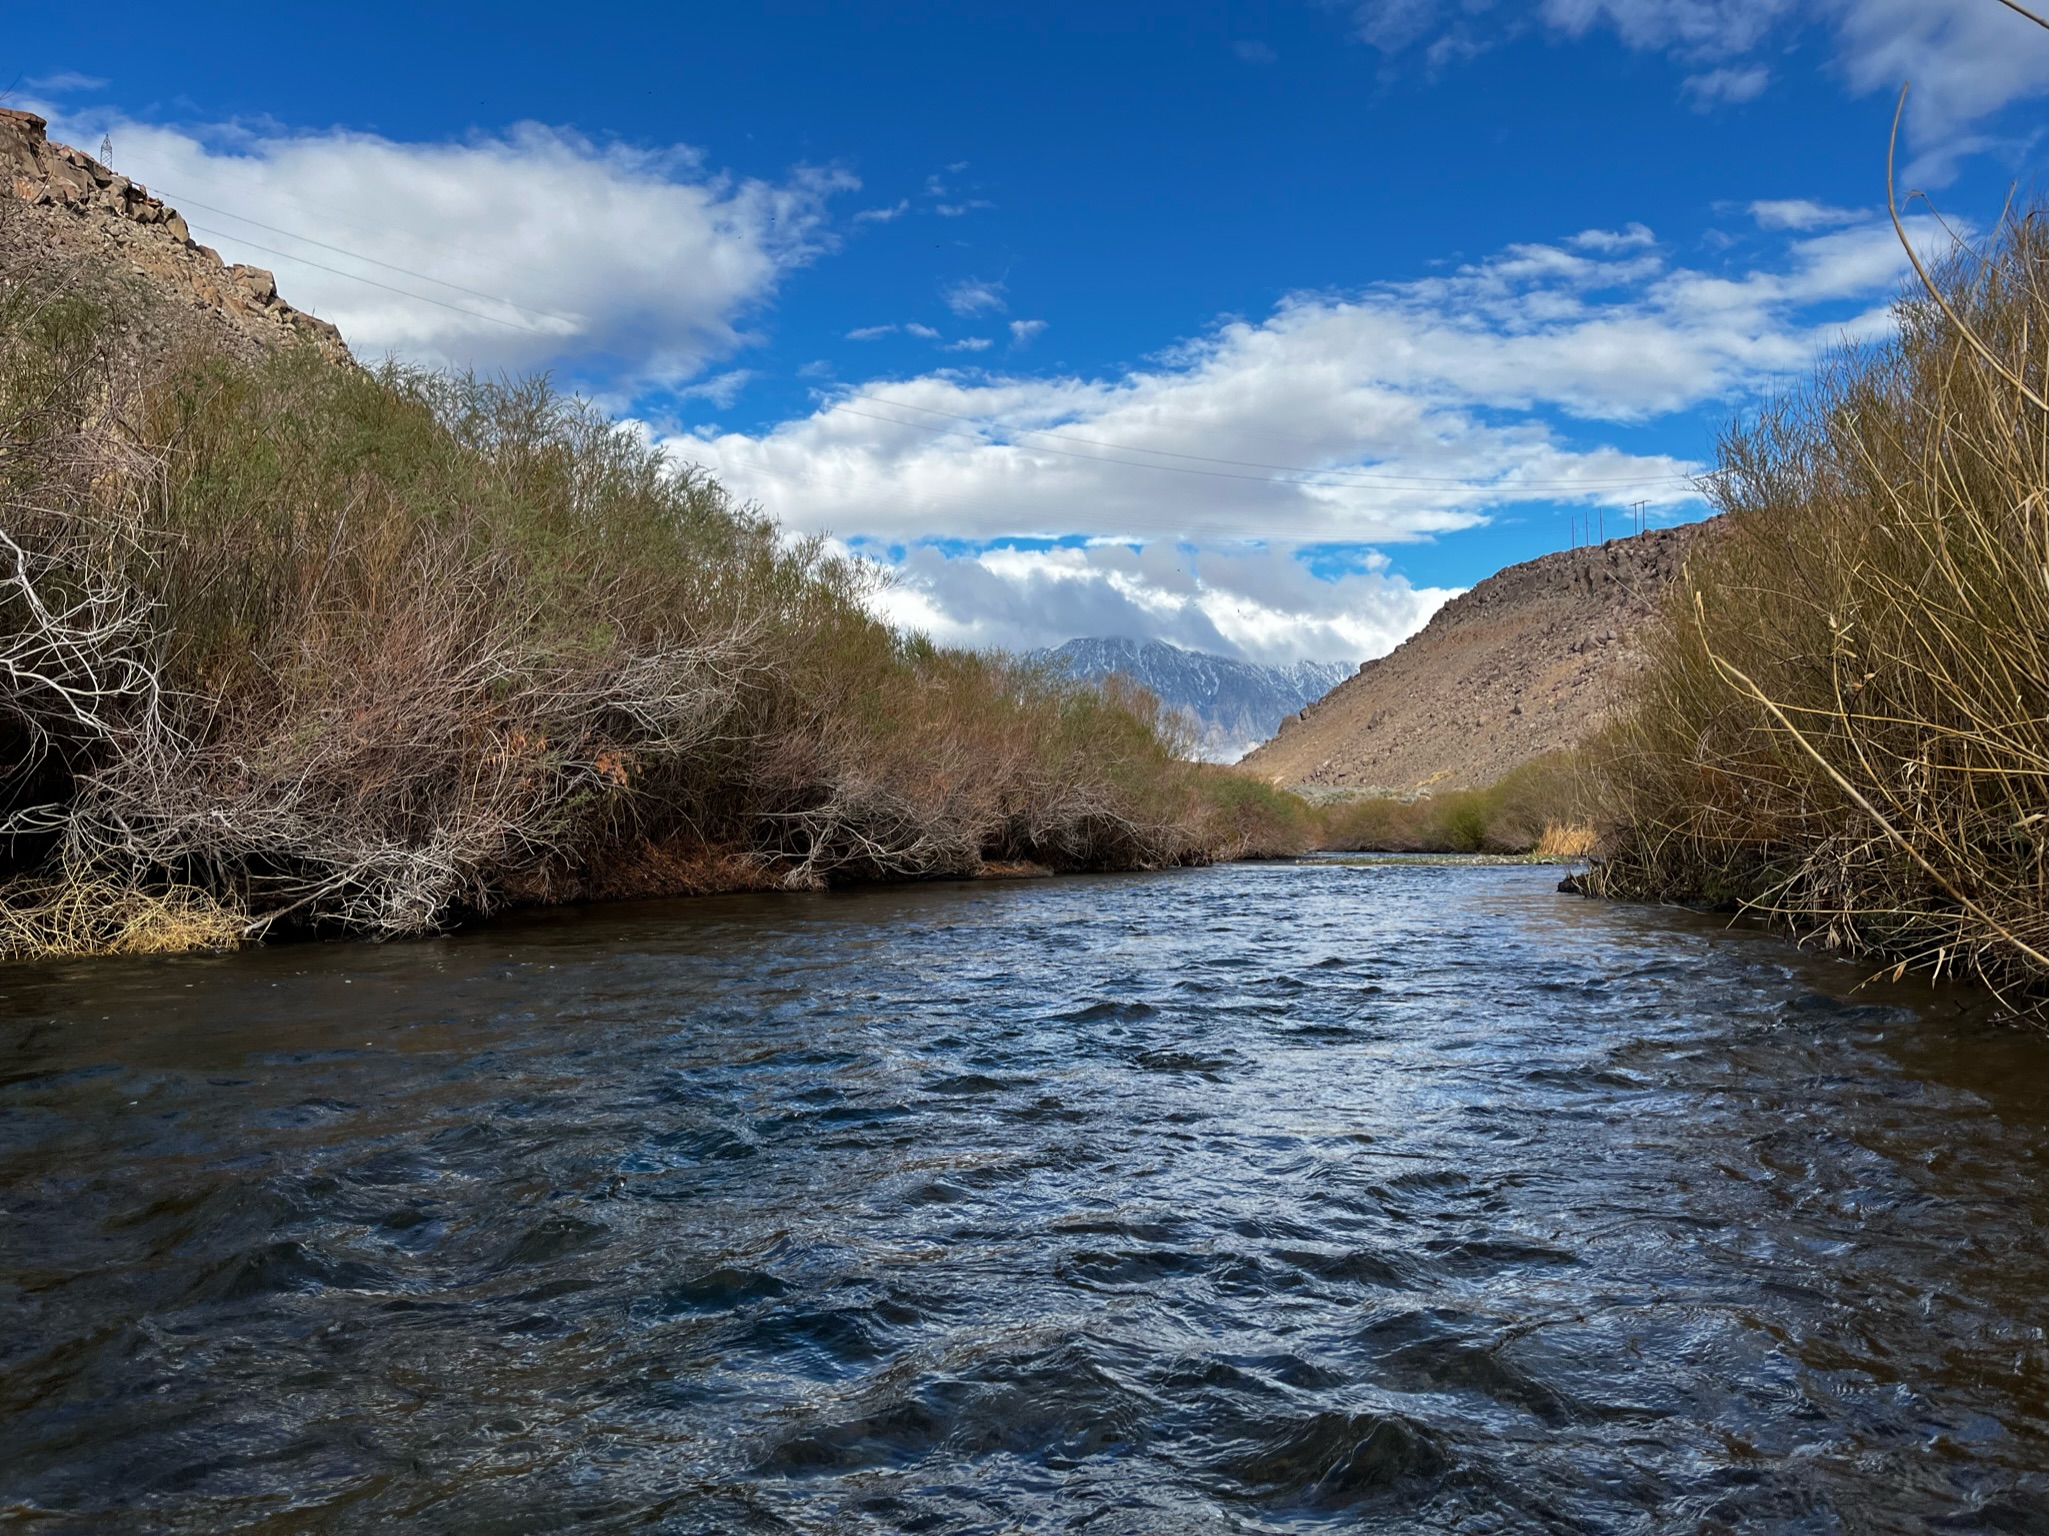 A serene river flows between banks lined with dry vegetation and low bushes. The water appears clear and calm under a bright blue sky dotted with white clouds. Distant mountains, popular among overland campers, rise in the background, partially covered in snow and adding to the scenic landscape.